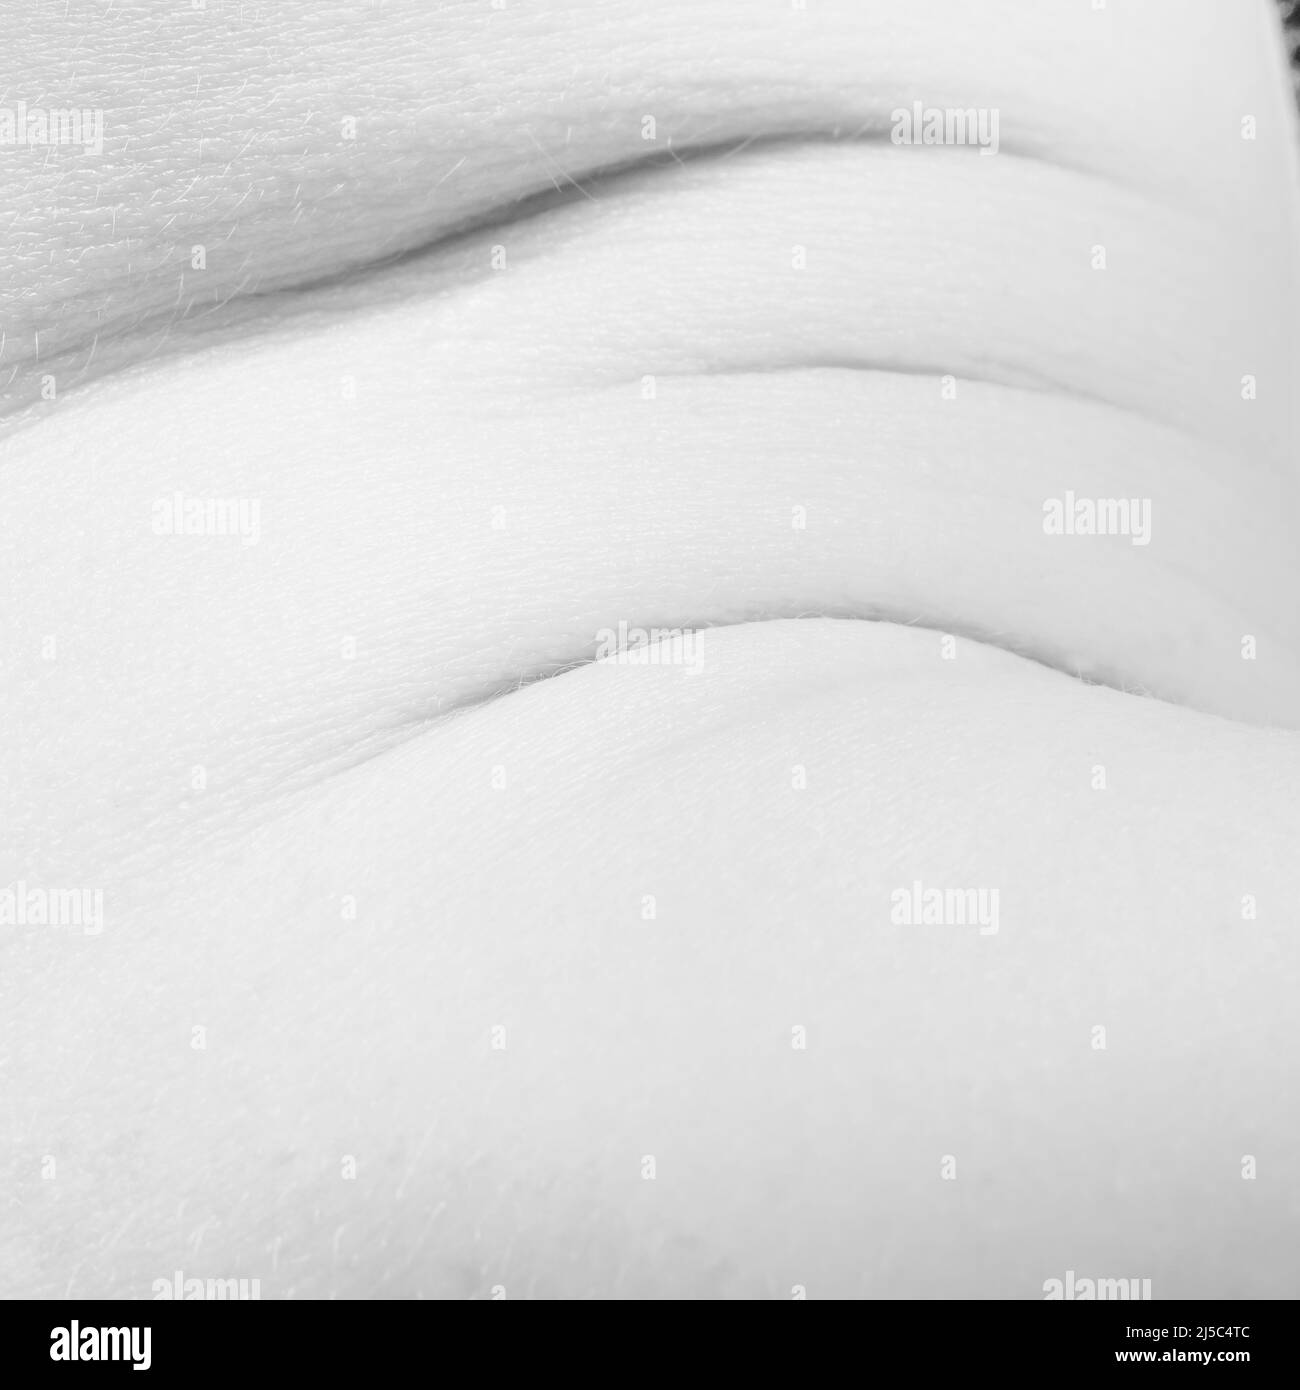 Artwork. Detailed texture of human skin. Close up part of male body. Skincare, bodycare, healthcare, hygiene and medicine concept. Macro photography Stock Photo